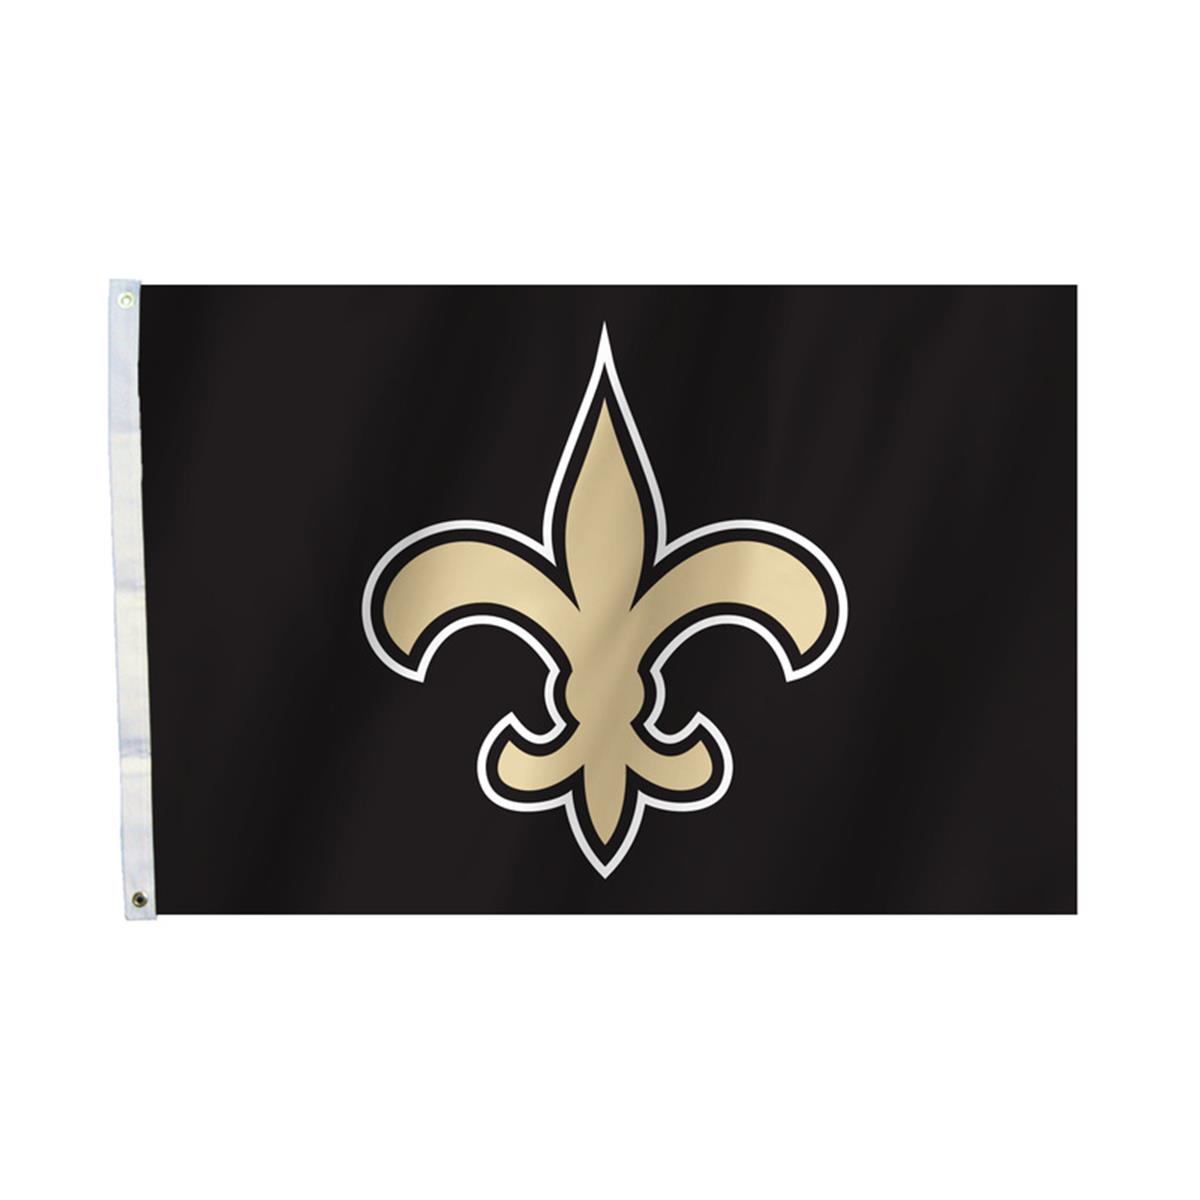 Picture of Fremont Die 92026B 2 x 3 in. New Orleans Saints All-Pro Flag